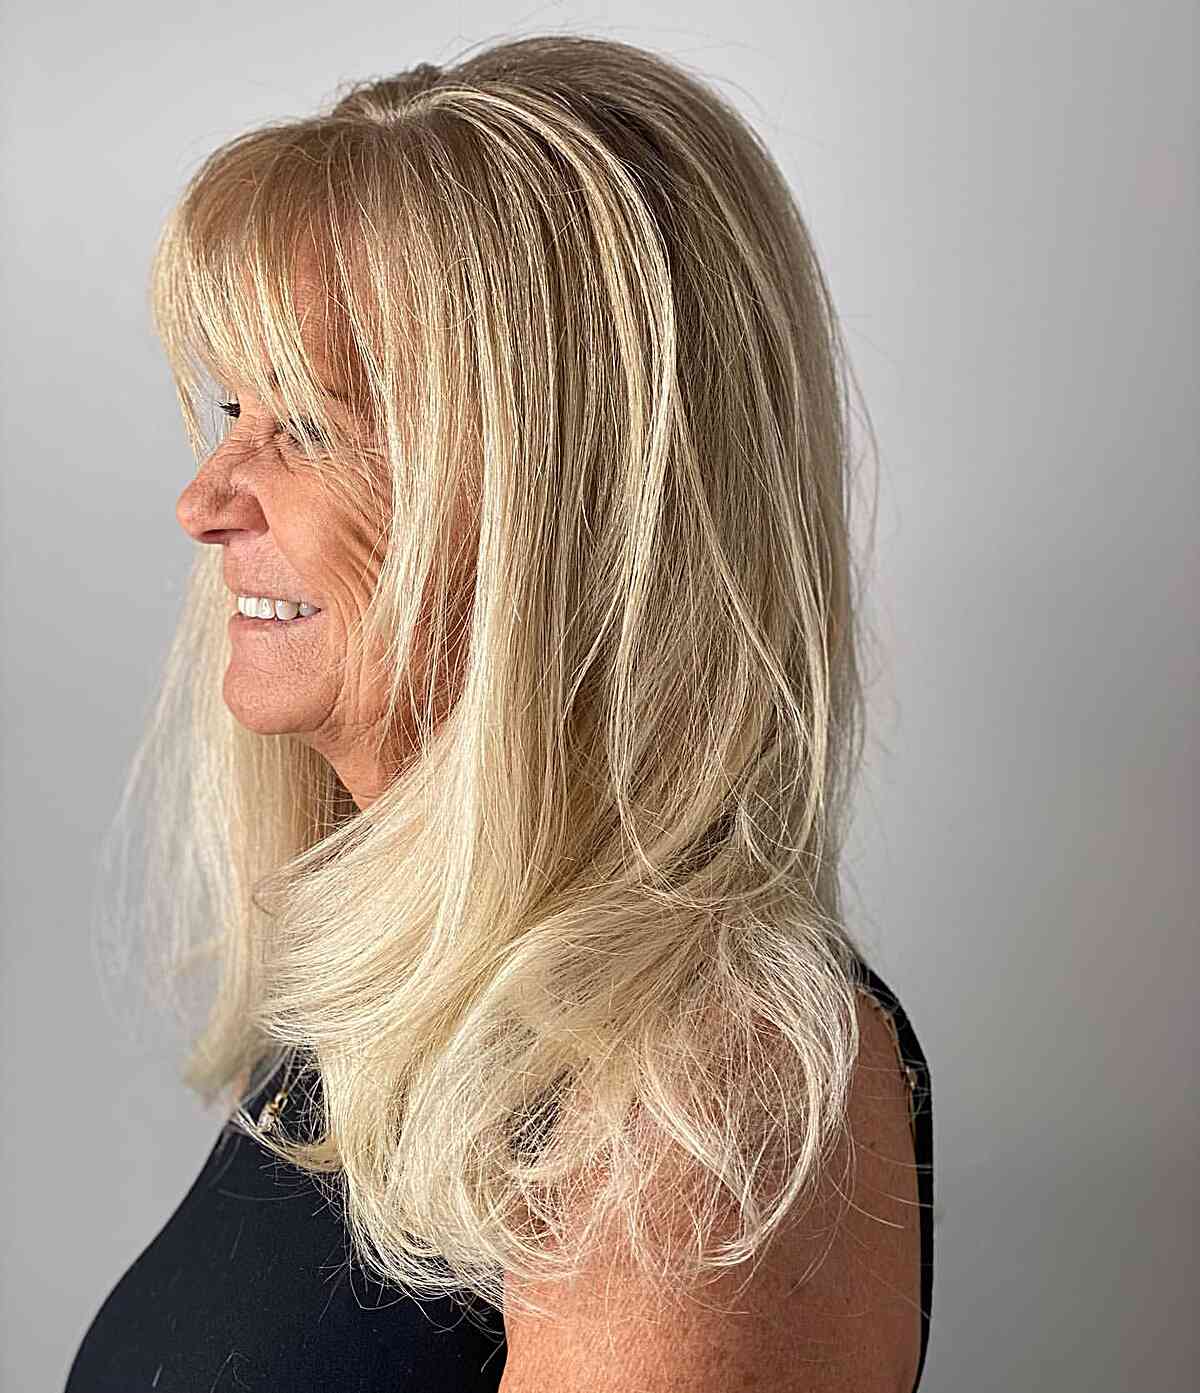 Long-Length Vanilla Blonde Hair with Front Bangs for Older Ladies Aged 50